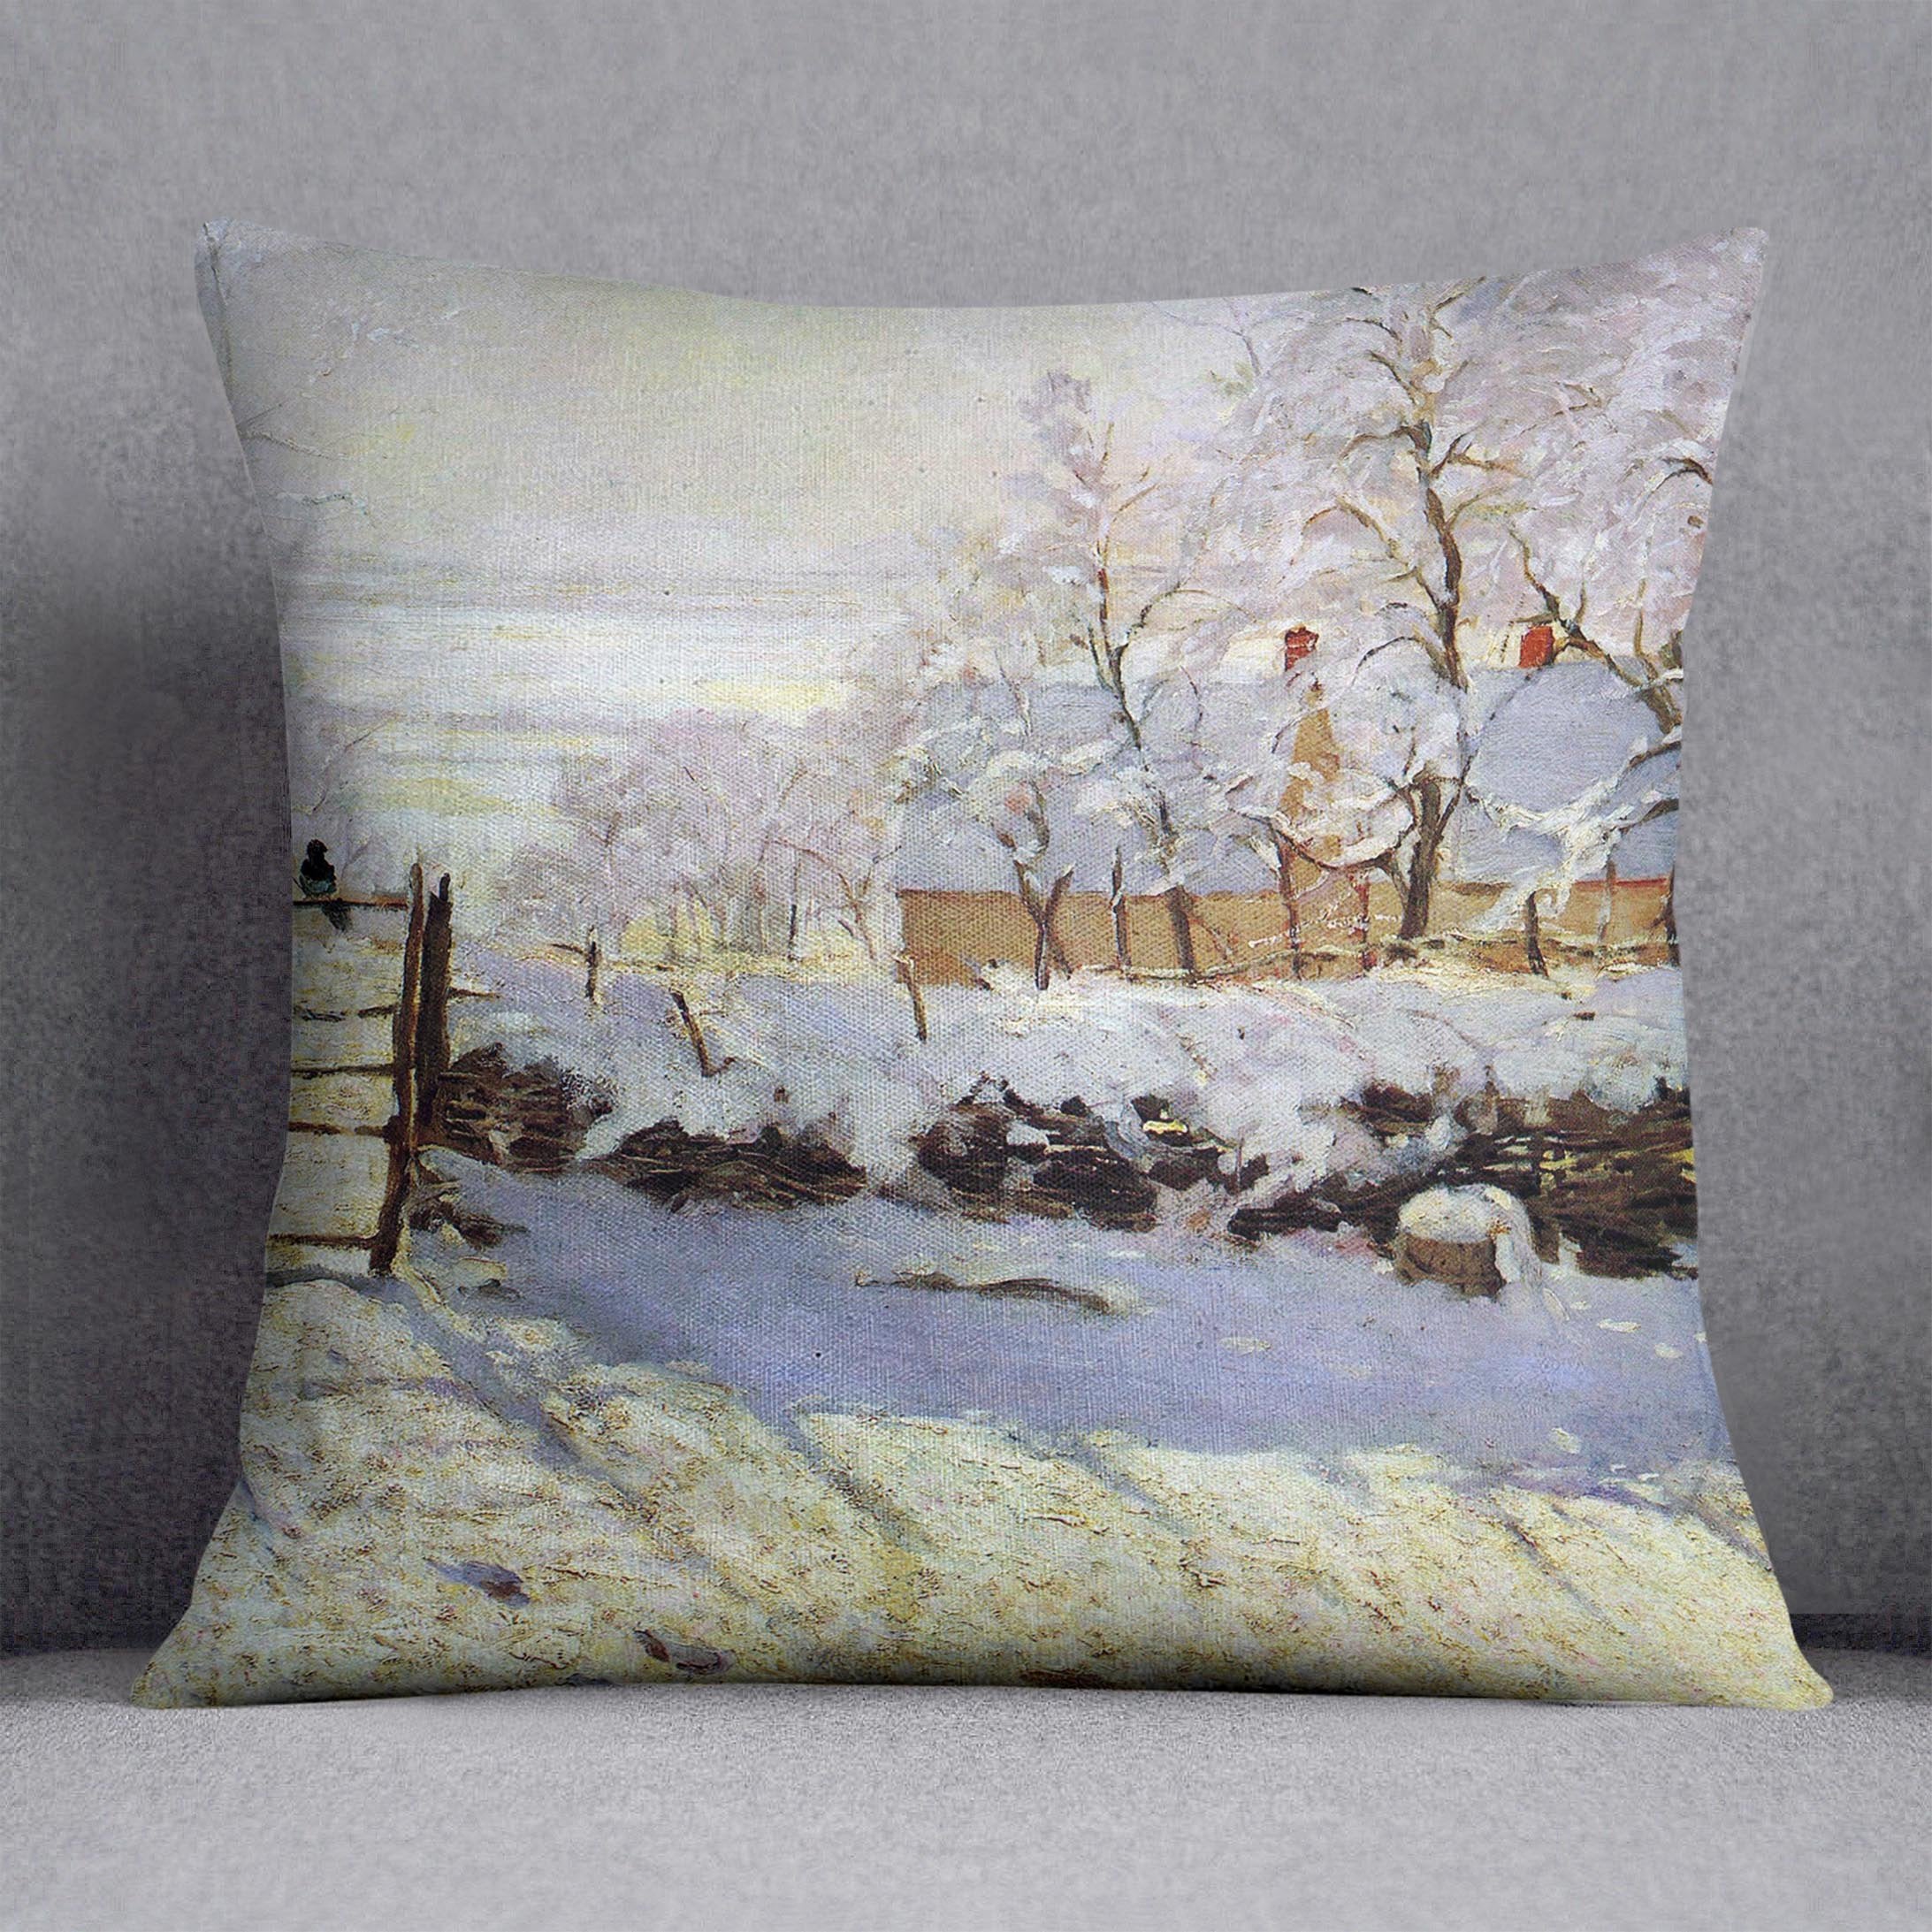 The Magpie by Monet Throw Pillow